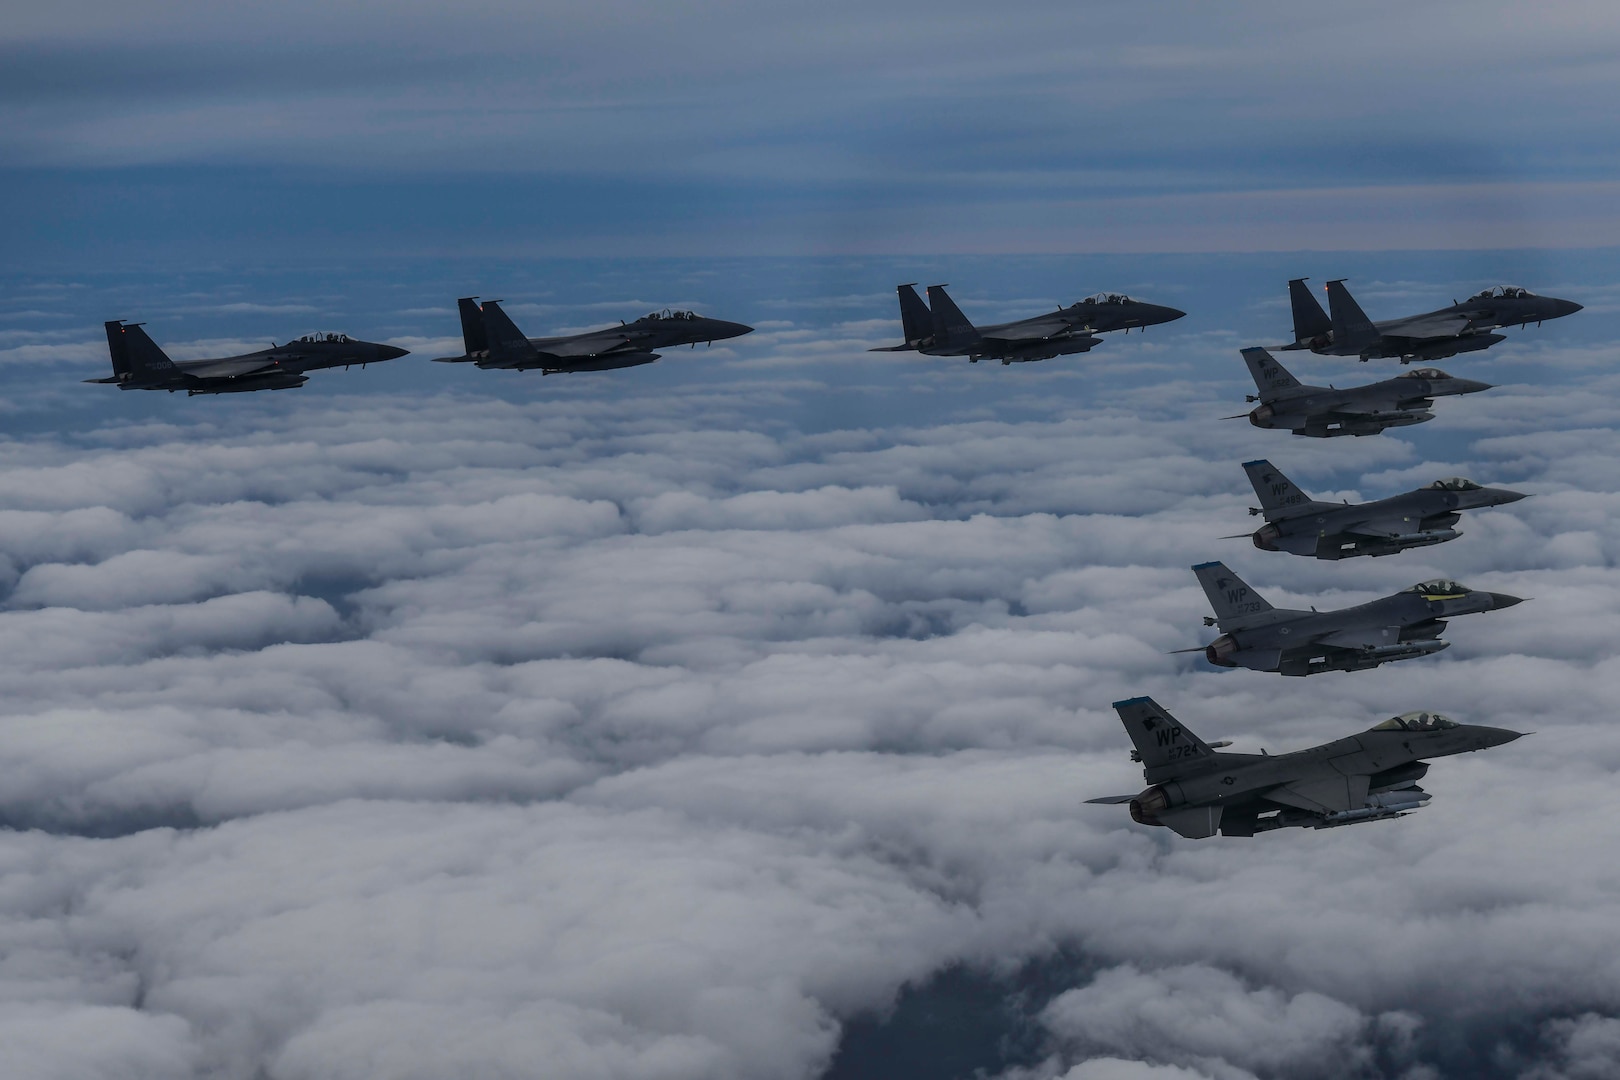 U.S. Air Force F-16 Fighting Falcons from the 8th Fighter Wing conducted flight operations over the Korean peninsula with Republic of Korea F-15Ks from the 11th Fighter Wing to demonstrate the close coordination and quick response between the two nations.